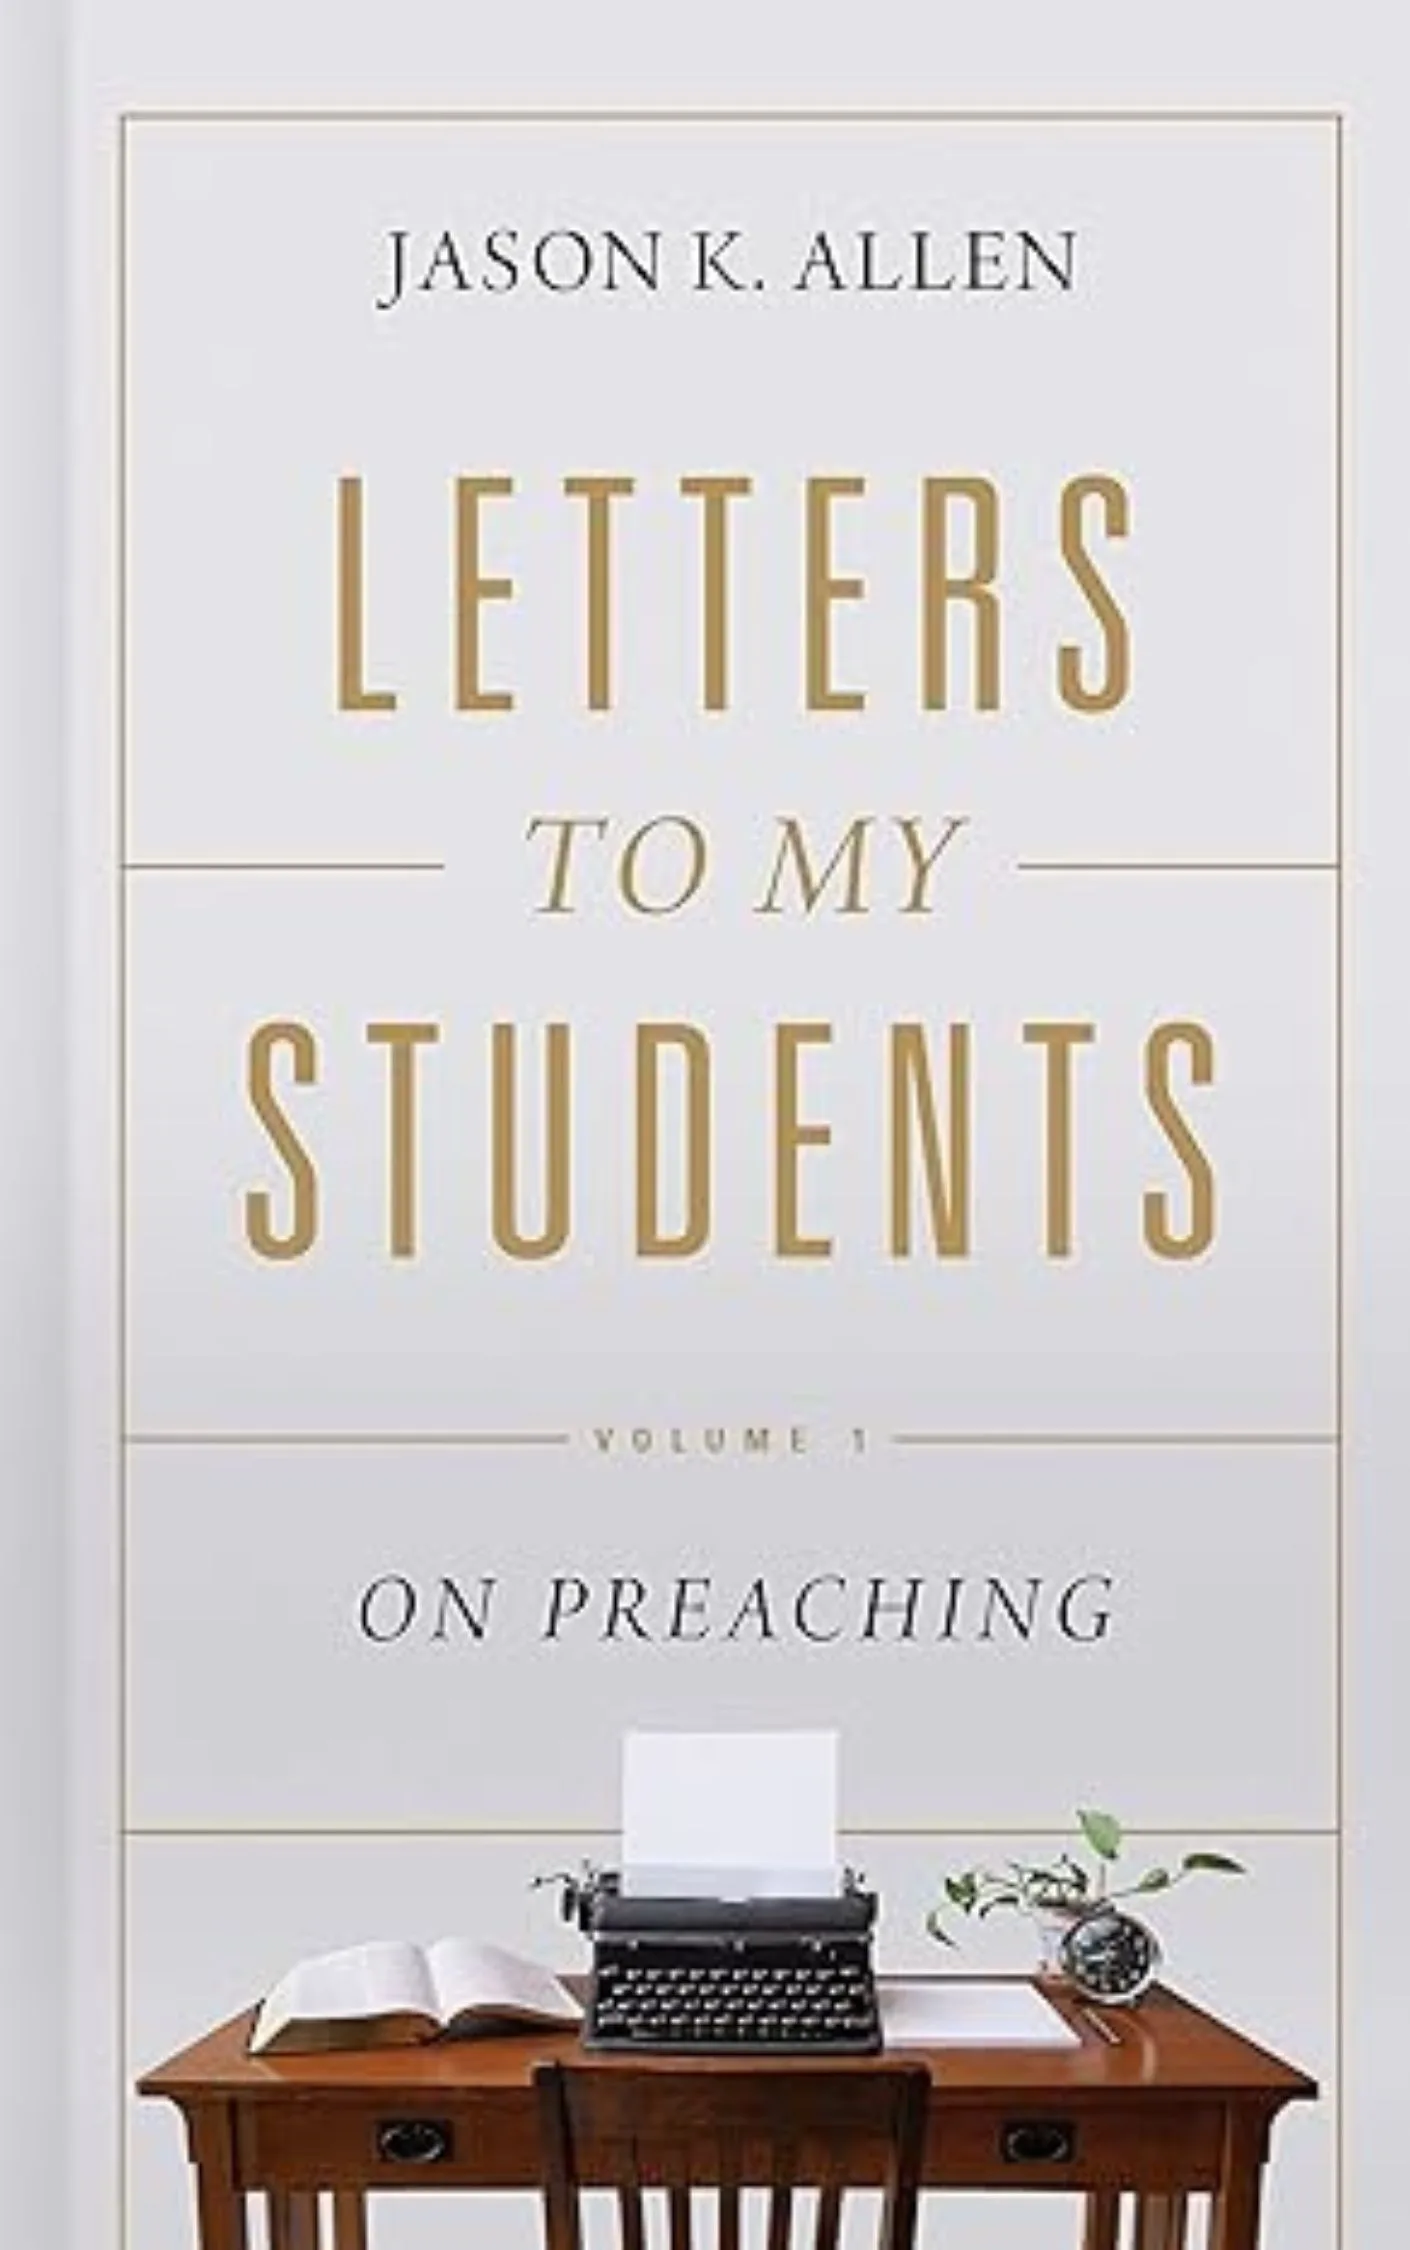 Letters to My Students Vol. 1 by Jason K Allen